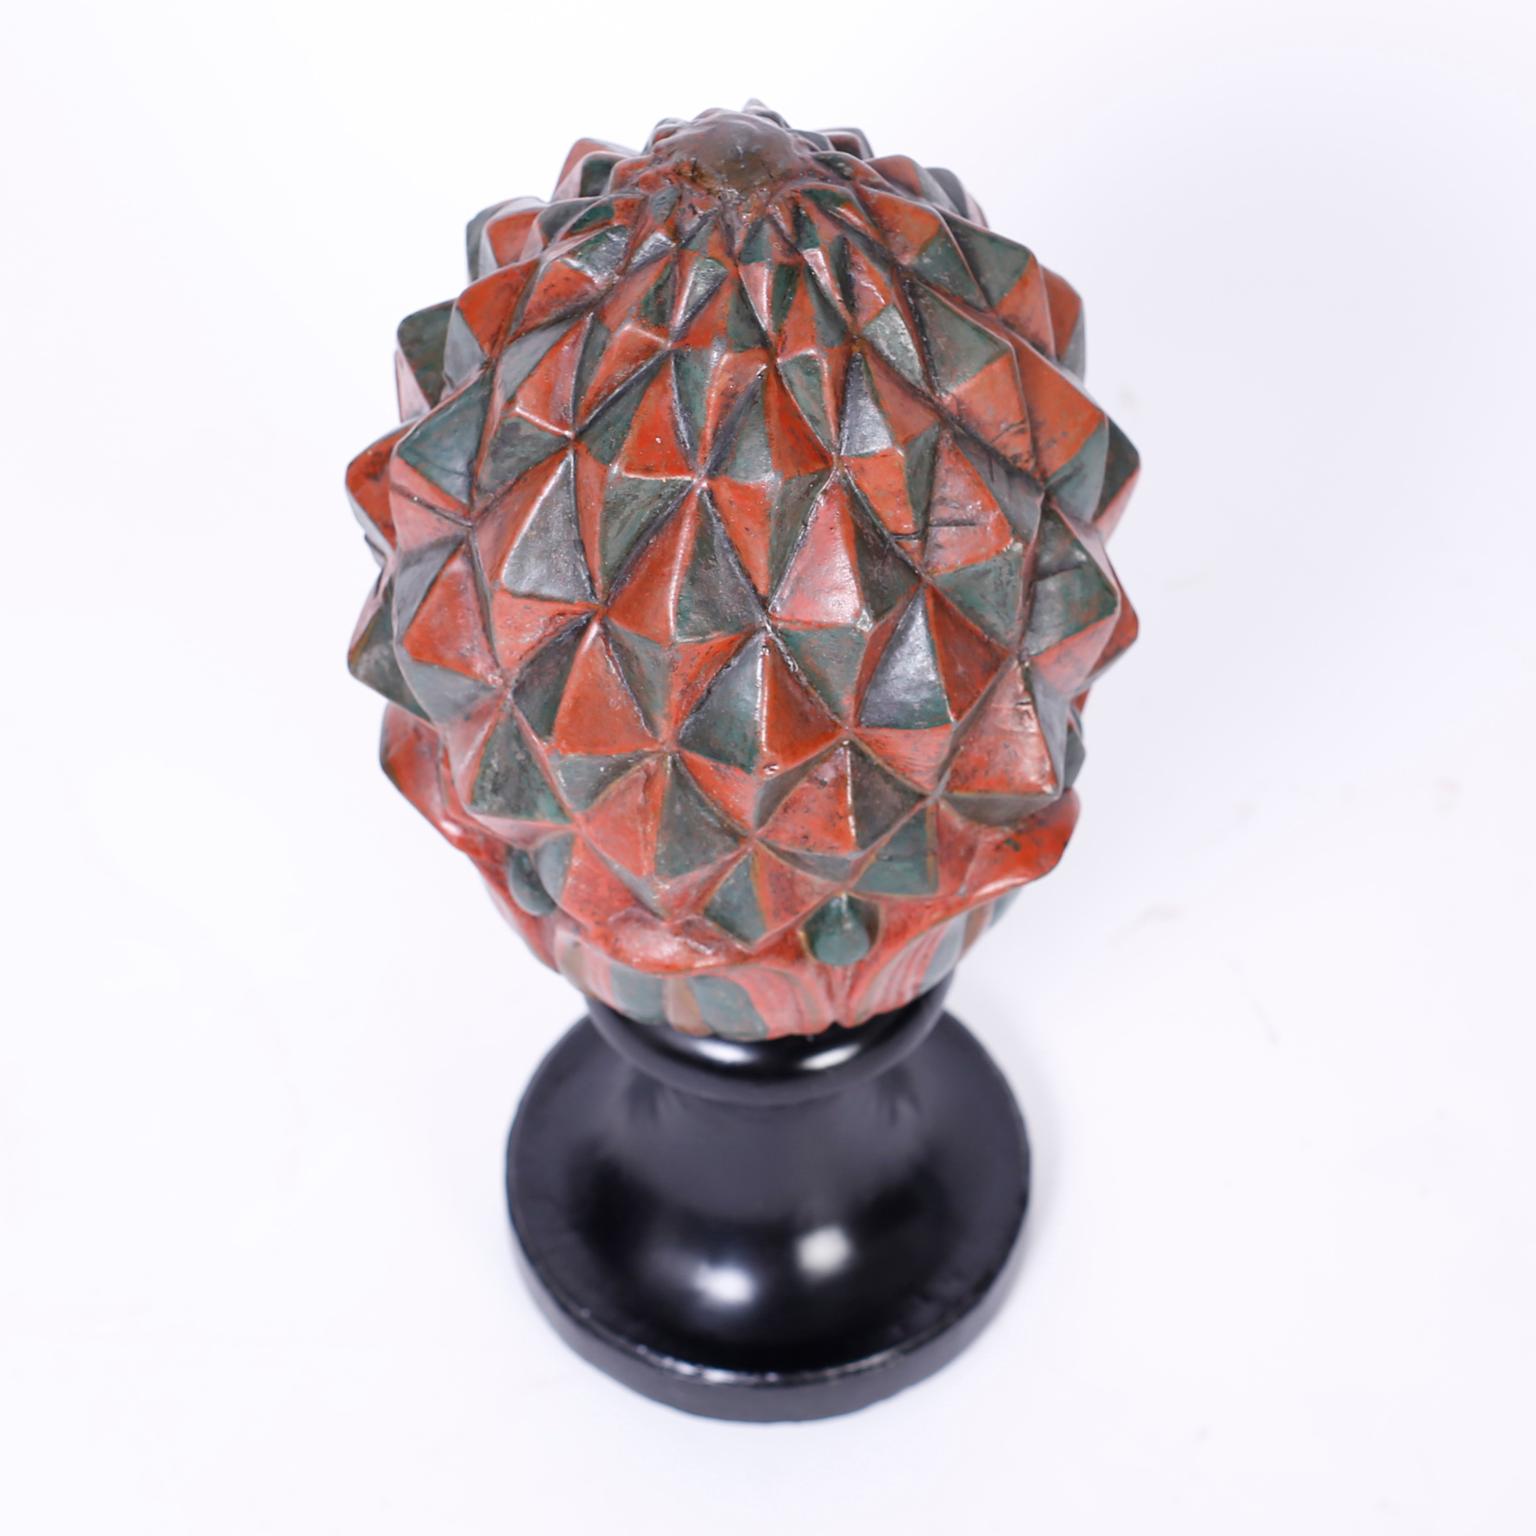 Late Victorian English ceramic stylized artichoke with a muted polychrome painted finish and presented on a Classic weighted ebonized stand.